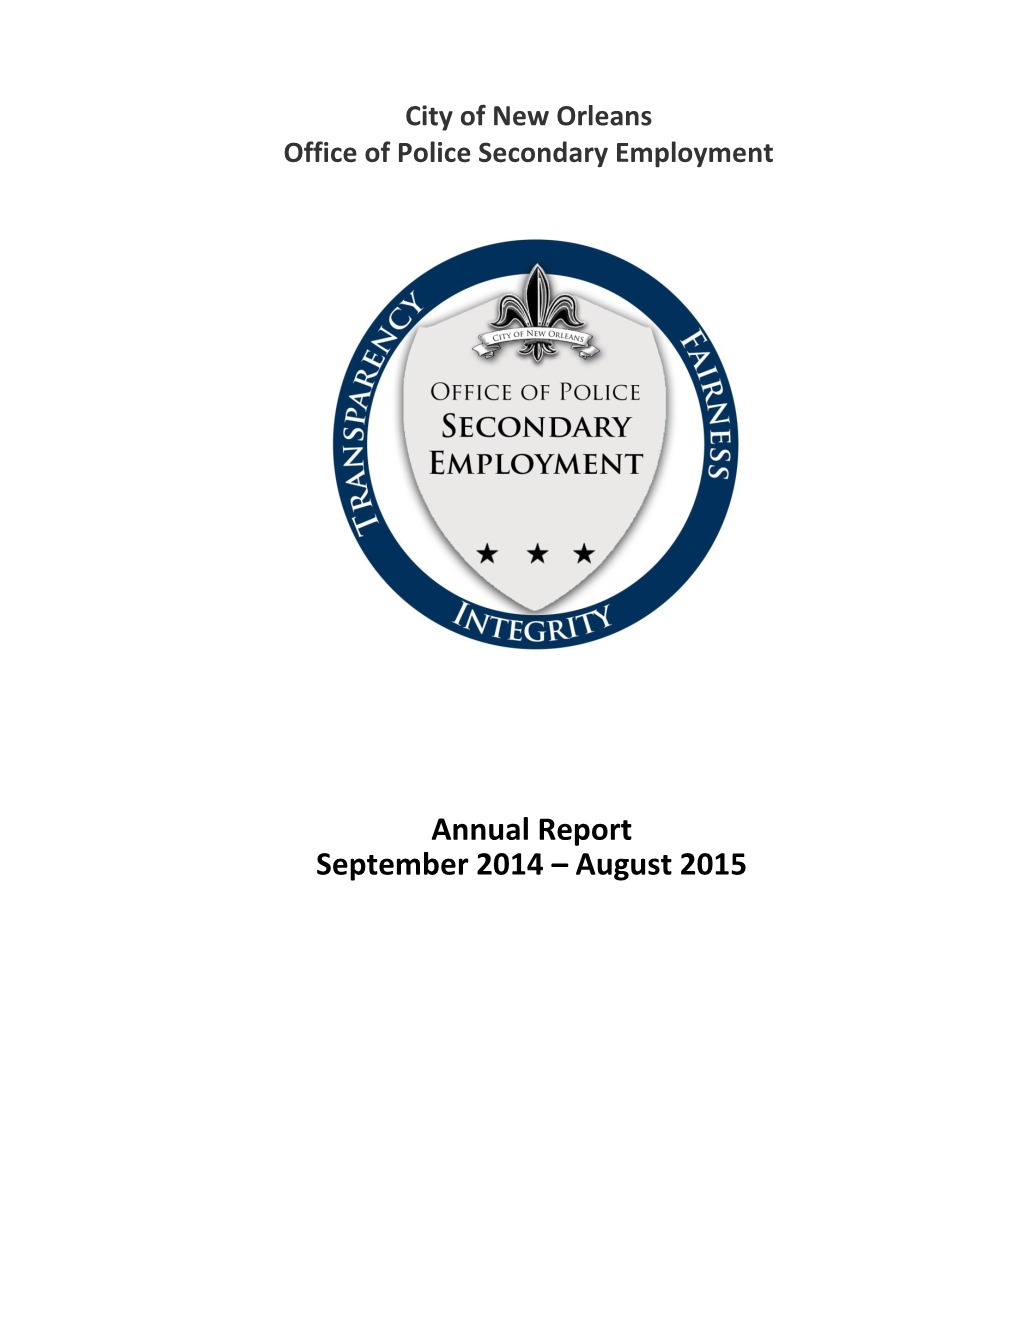 OPSE Annual Report, Sep 2014